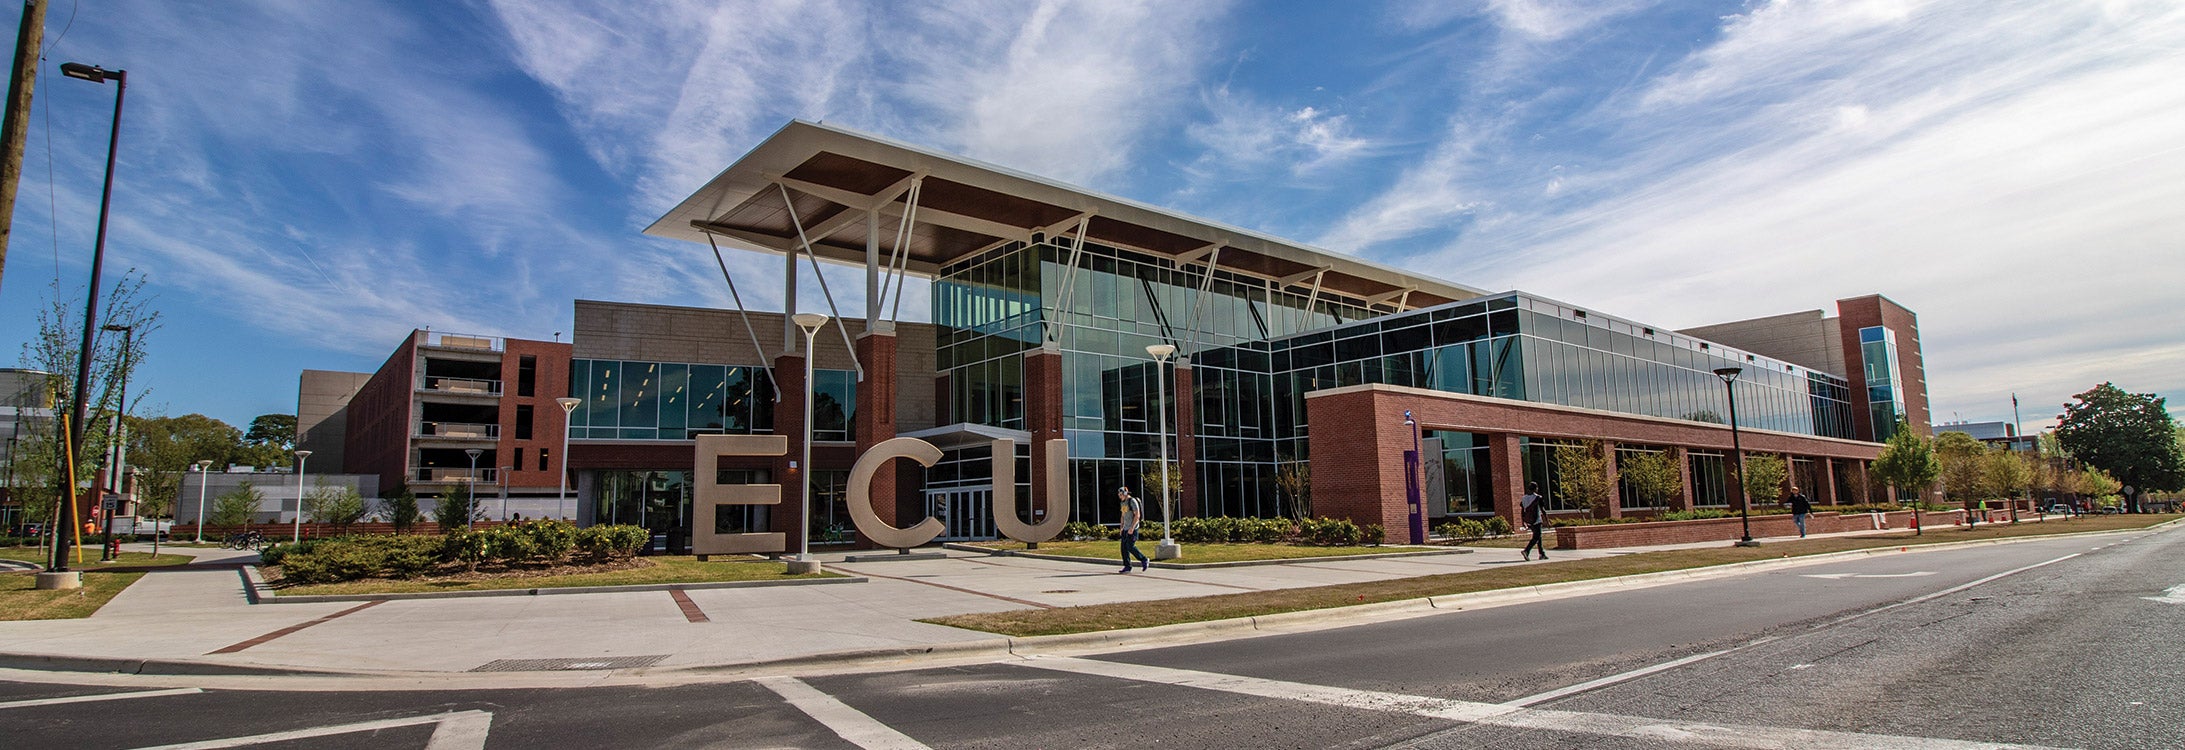 The LEED-certified center is 220,000 square feet built on about seven acres. The total project cost was $122 million. T.A. Loving and Barnhill Contracting Co. built the center, its chiller plant and the 724-space parking deck. Out front, lofty “ECU” letters make a bold statement, welcoming Pirates and visitors to the new front porch and living room of the university.